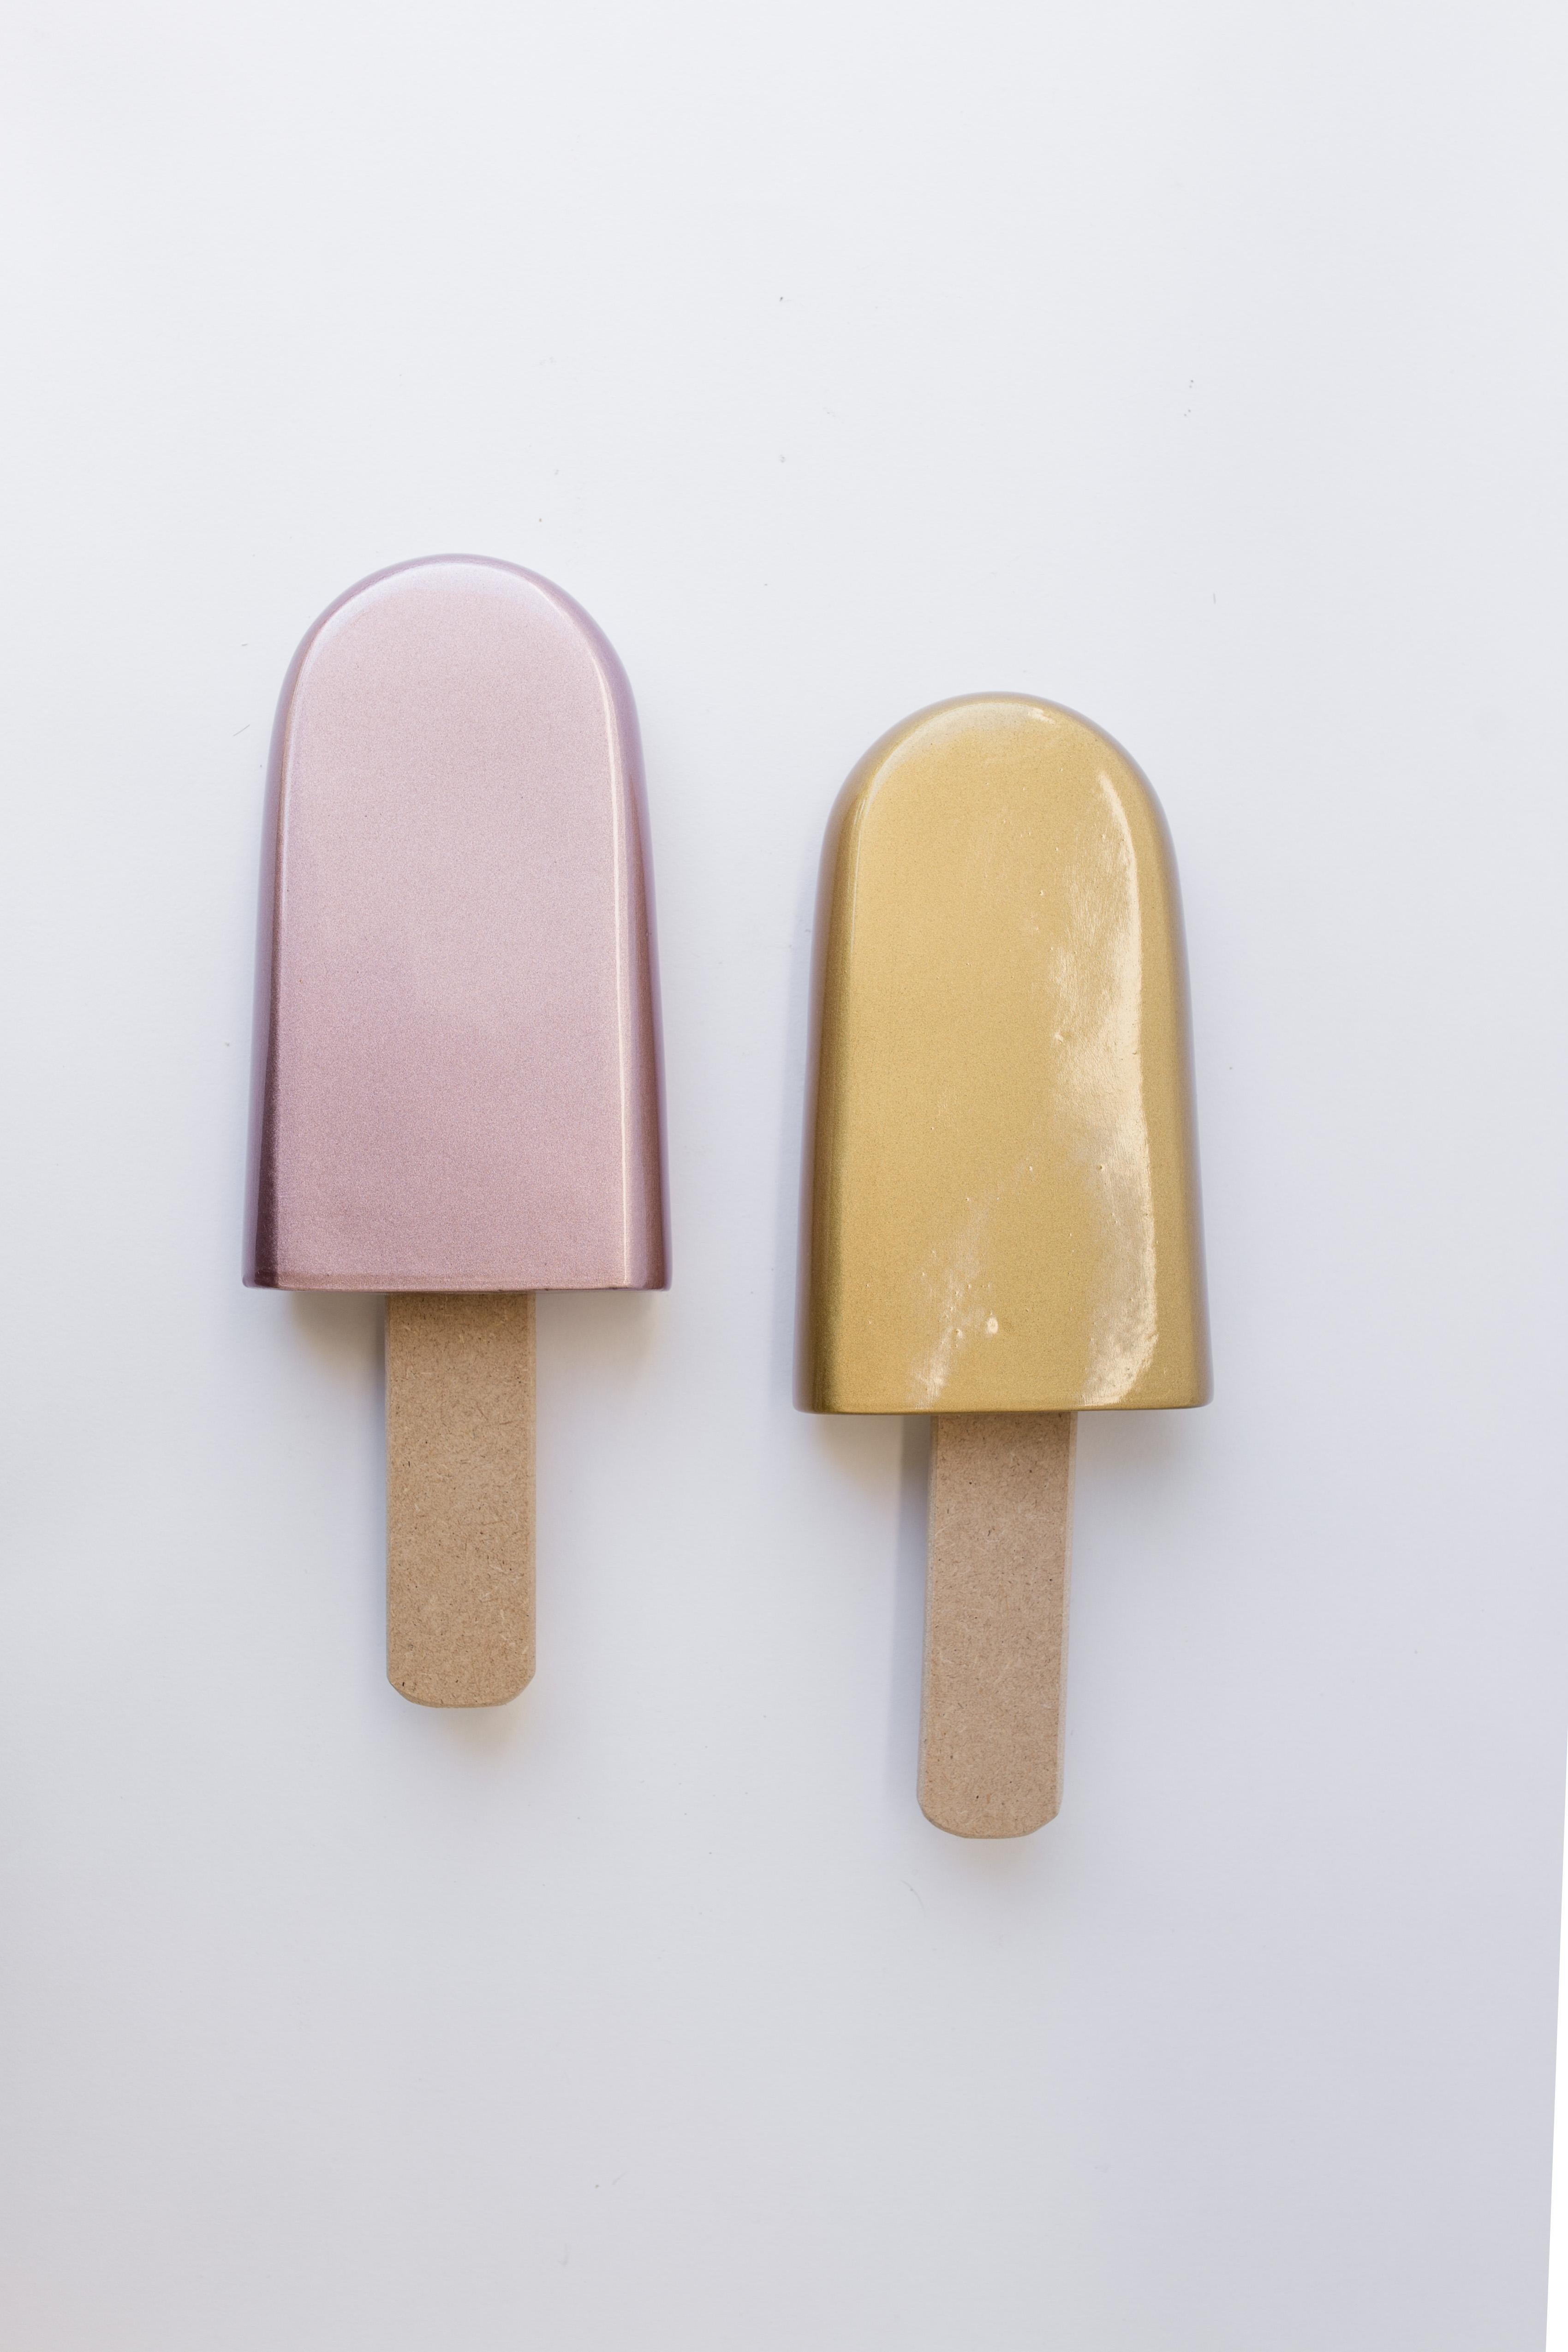 Rose gold ceramic popsicle - Sculpture by Reli Smith and Osnat Yaffe Zimmerman